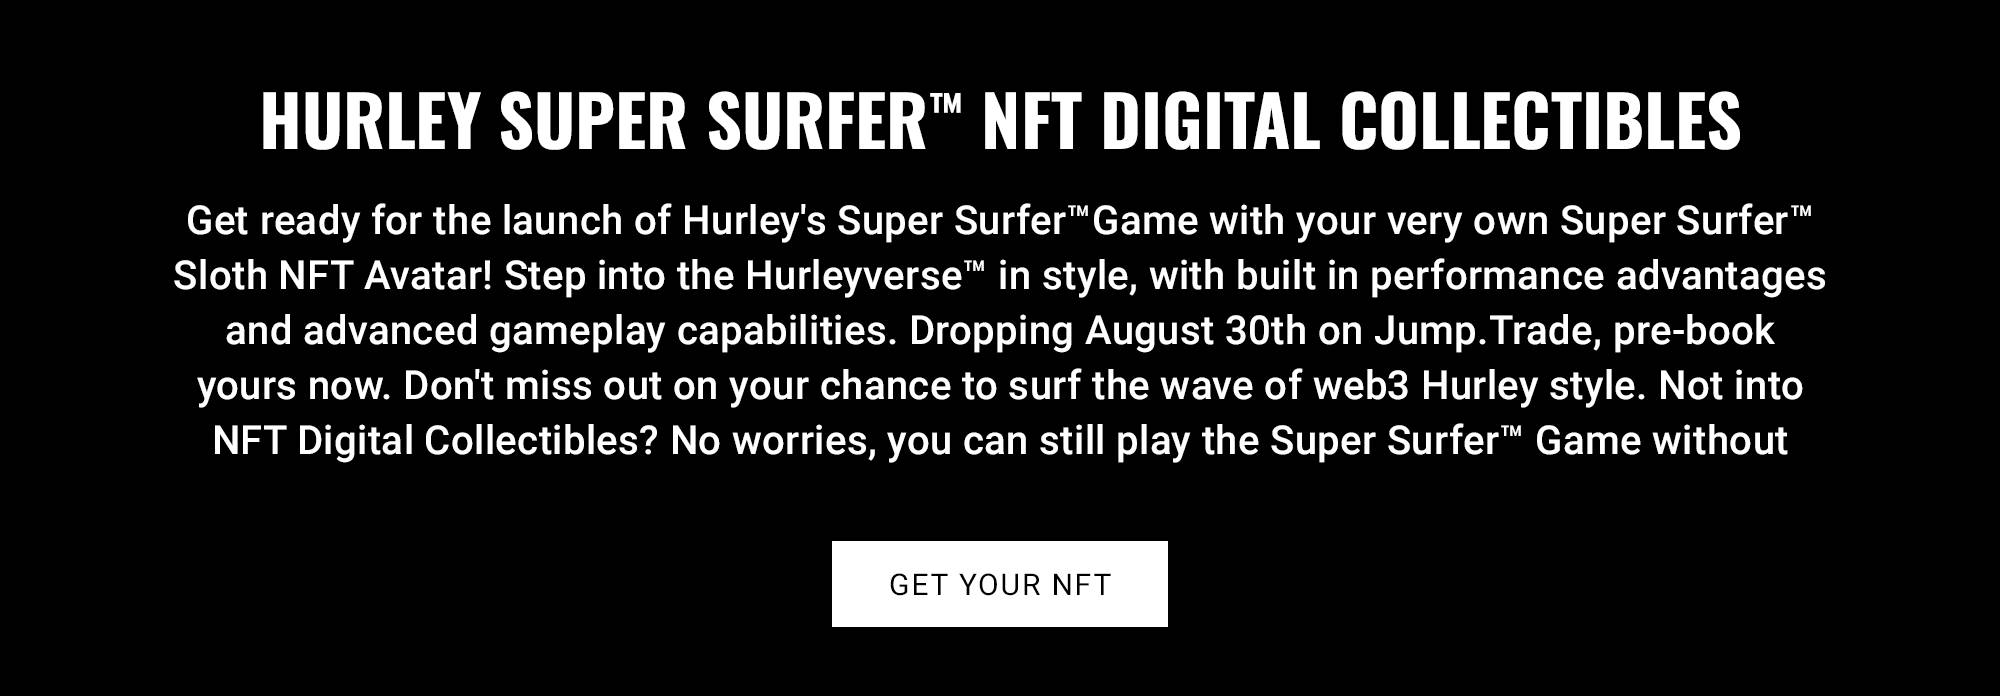 HURLEY SUPER SURFER NFT DIGITAL COLLECTIBLES  Get ready for the launch of Hurley's Super SurferTM Game with your very own Super Surfer Sloth NFT Avatar! Step into the Hurleyverse™ in style, with built in performance advantages and advanced gameplay capabilities. Dropping August 30th on Jump.Trade, pre-book yours now. Don't miss out on your chance to surf the wave of web3 Hurley style. Not into NFT Digital Collectibles? No worries, you can still play the Super SurferTM Game without one.  CTA: GET YOUR NFT